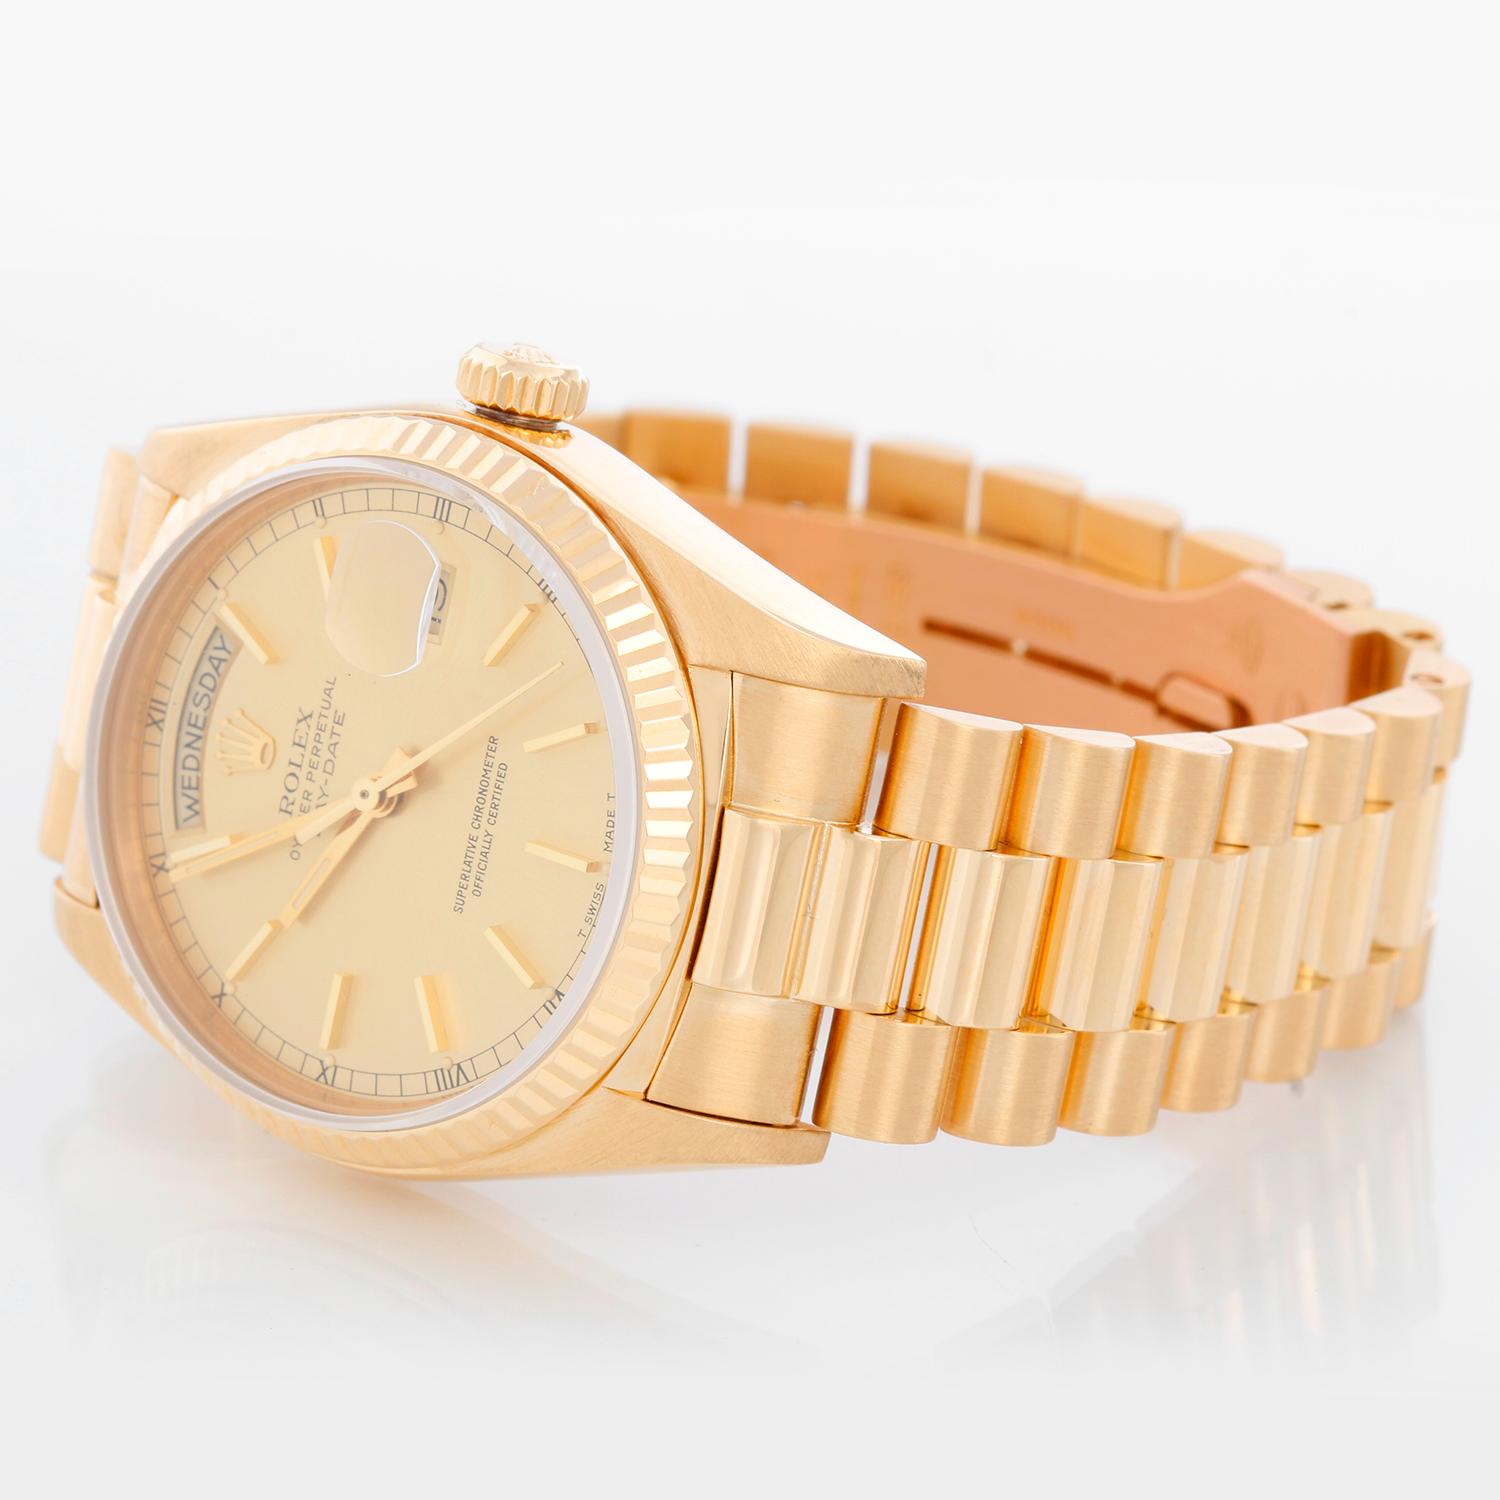 Rolex President Day-Date 18k Yellow Gold Men's Watch 18038 - Automatic winding; quick-set; sapphire crystal. 18k yellow gold case with fluted bezel  (36mm diameter). Champagne dial with stick hour markers . 18k yellow gold President bracelet.